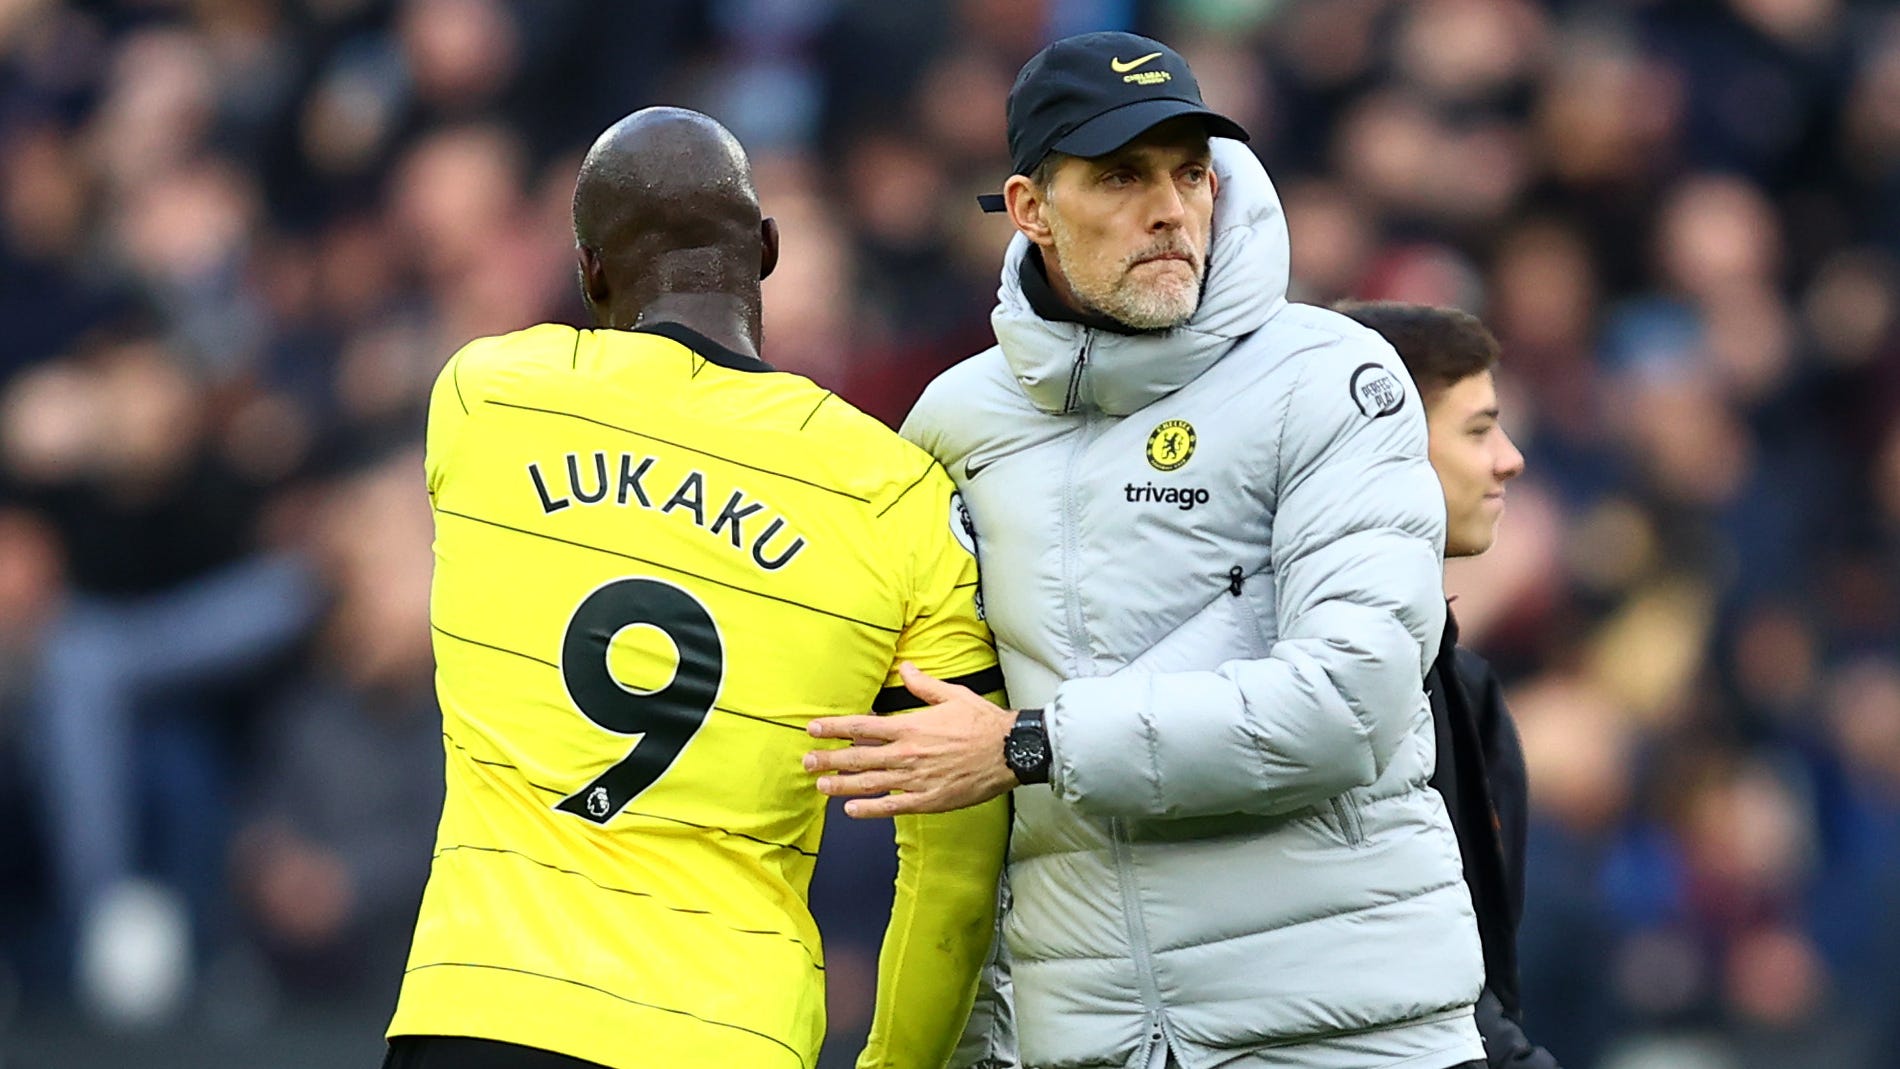 Chelsea players back Tuchel after Lukaku row - but manager and striker now  need to put sideshow behind them  Uganda